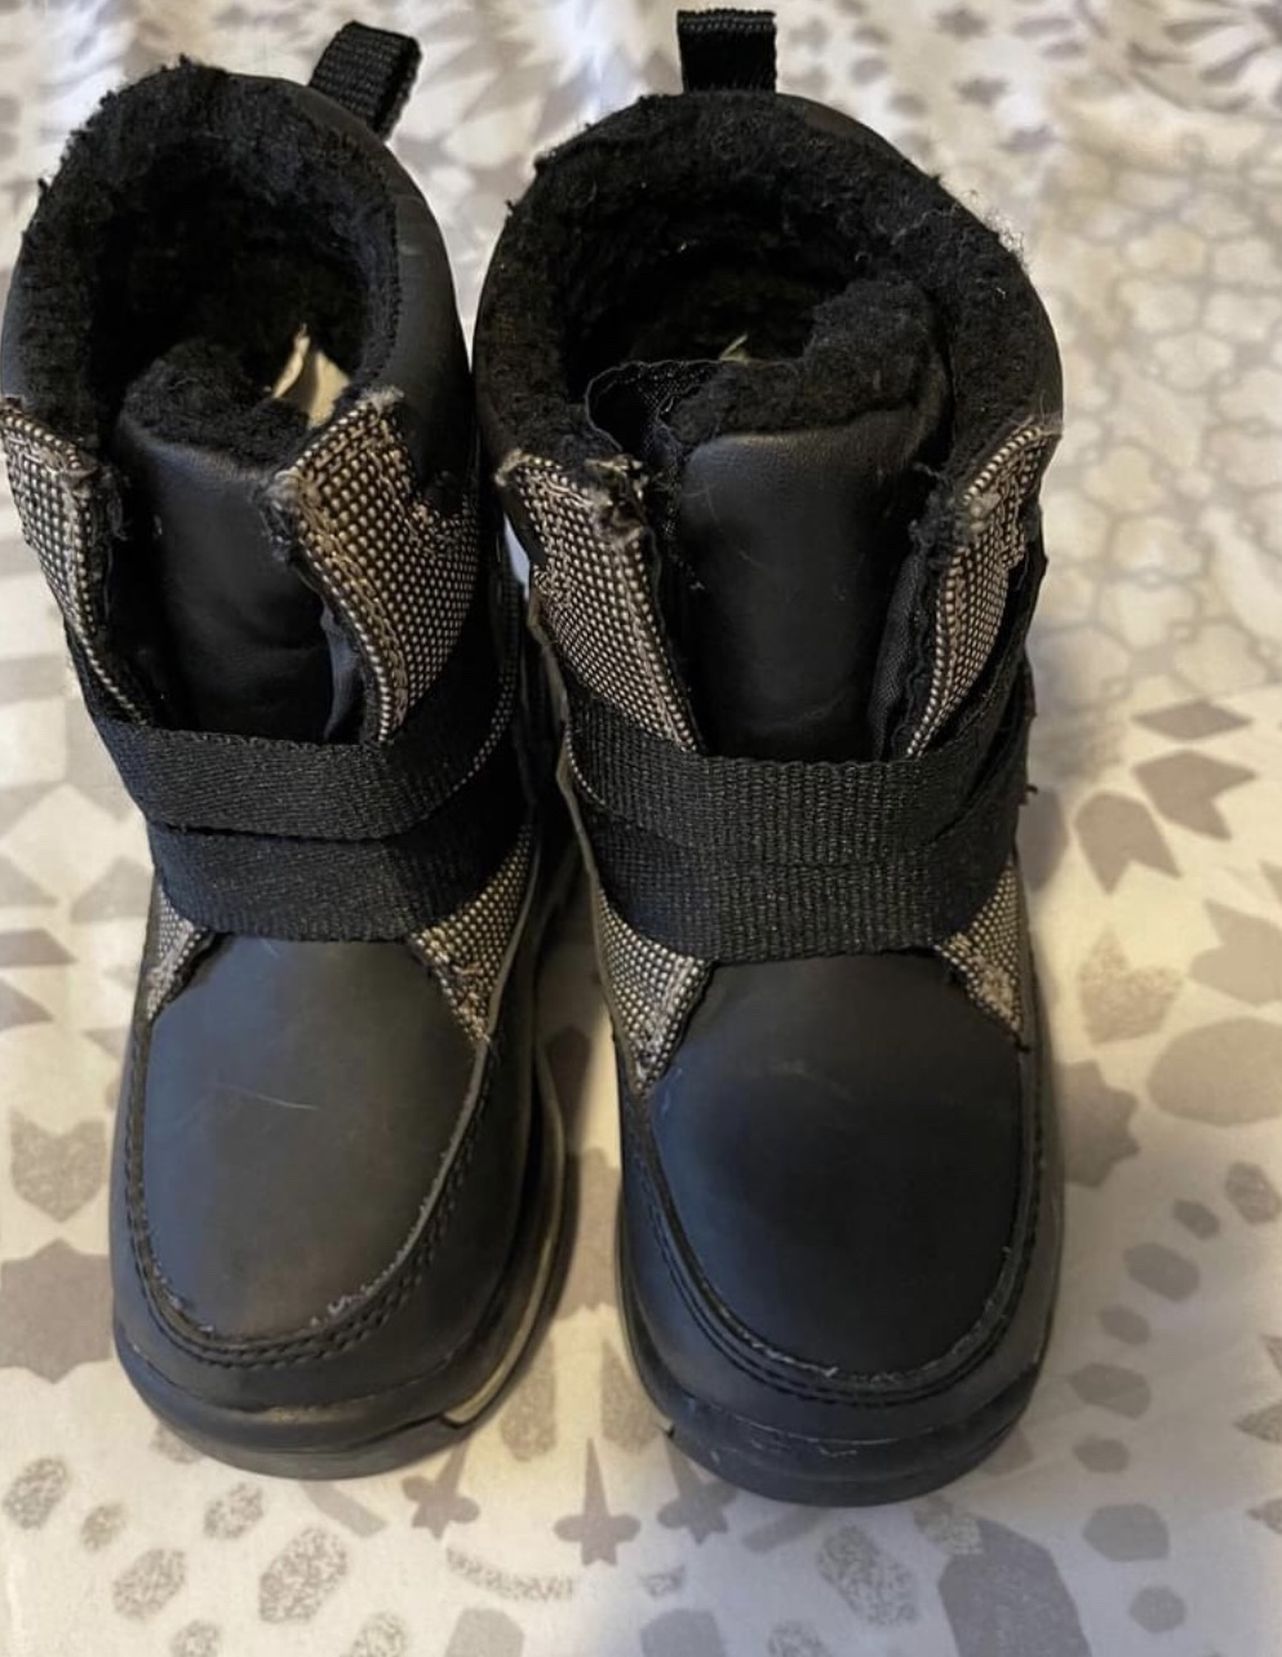 Toddler/ Kids Winter/ Snow Boots Size 7